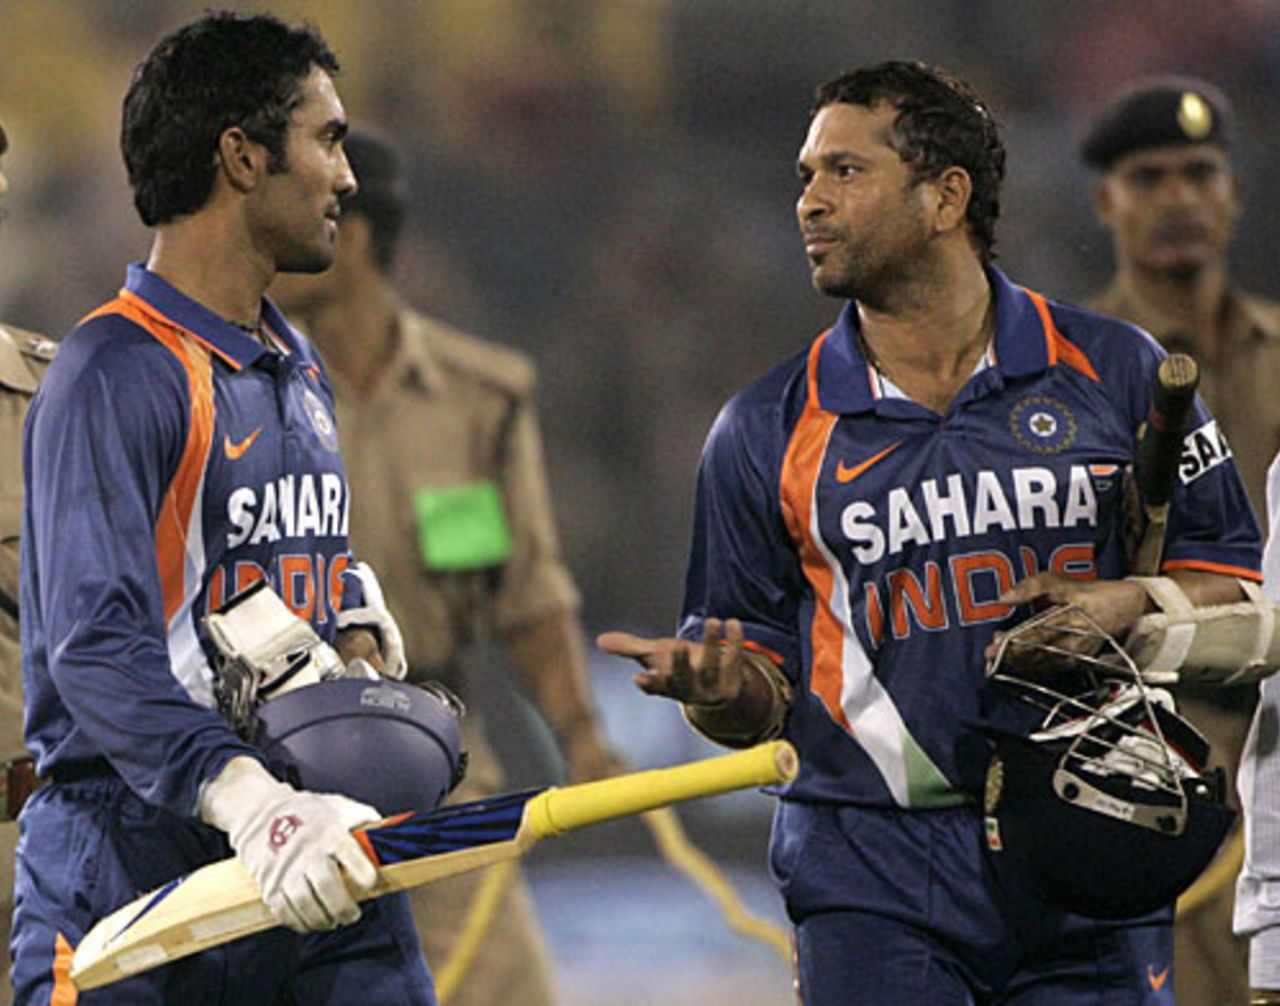 Sachin Tendulkar makes a point to Dinesh Karthik after wrapping up the match, India v Sri Lanka, 3rd ODI, Cuttack, December 21, 2009